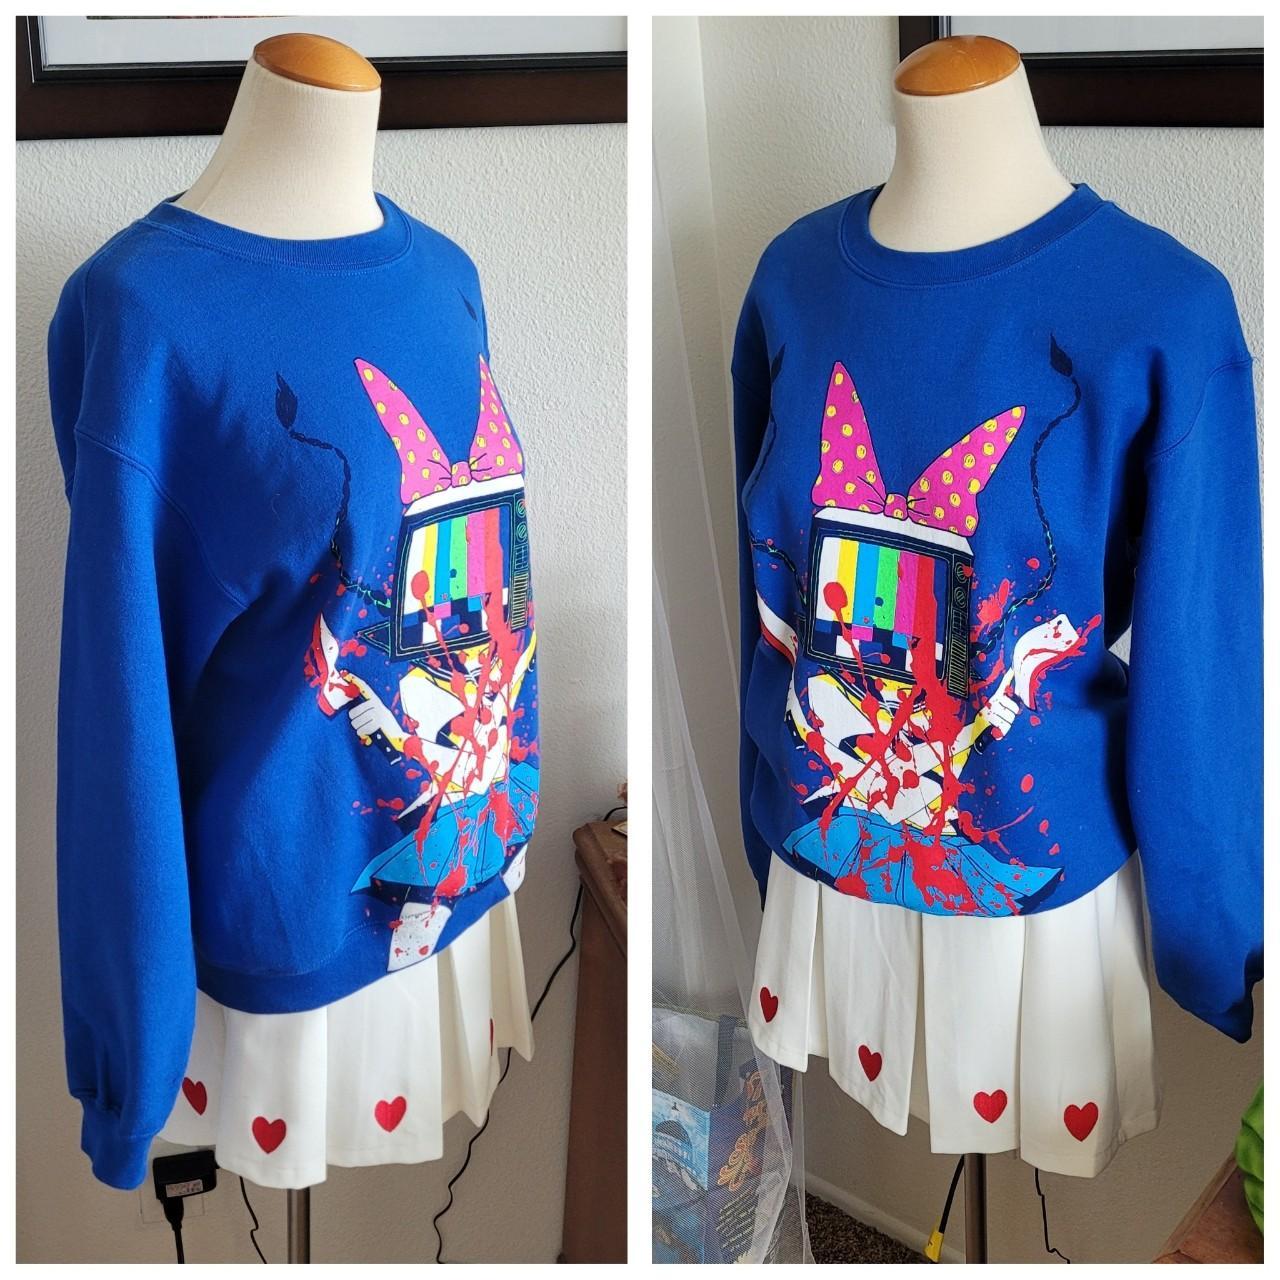 Product Image 3 - Vintage OMOCAT sweater!

This style is